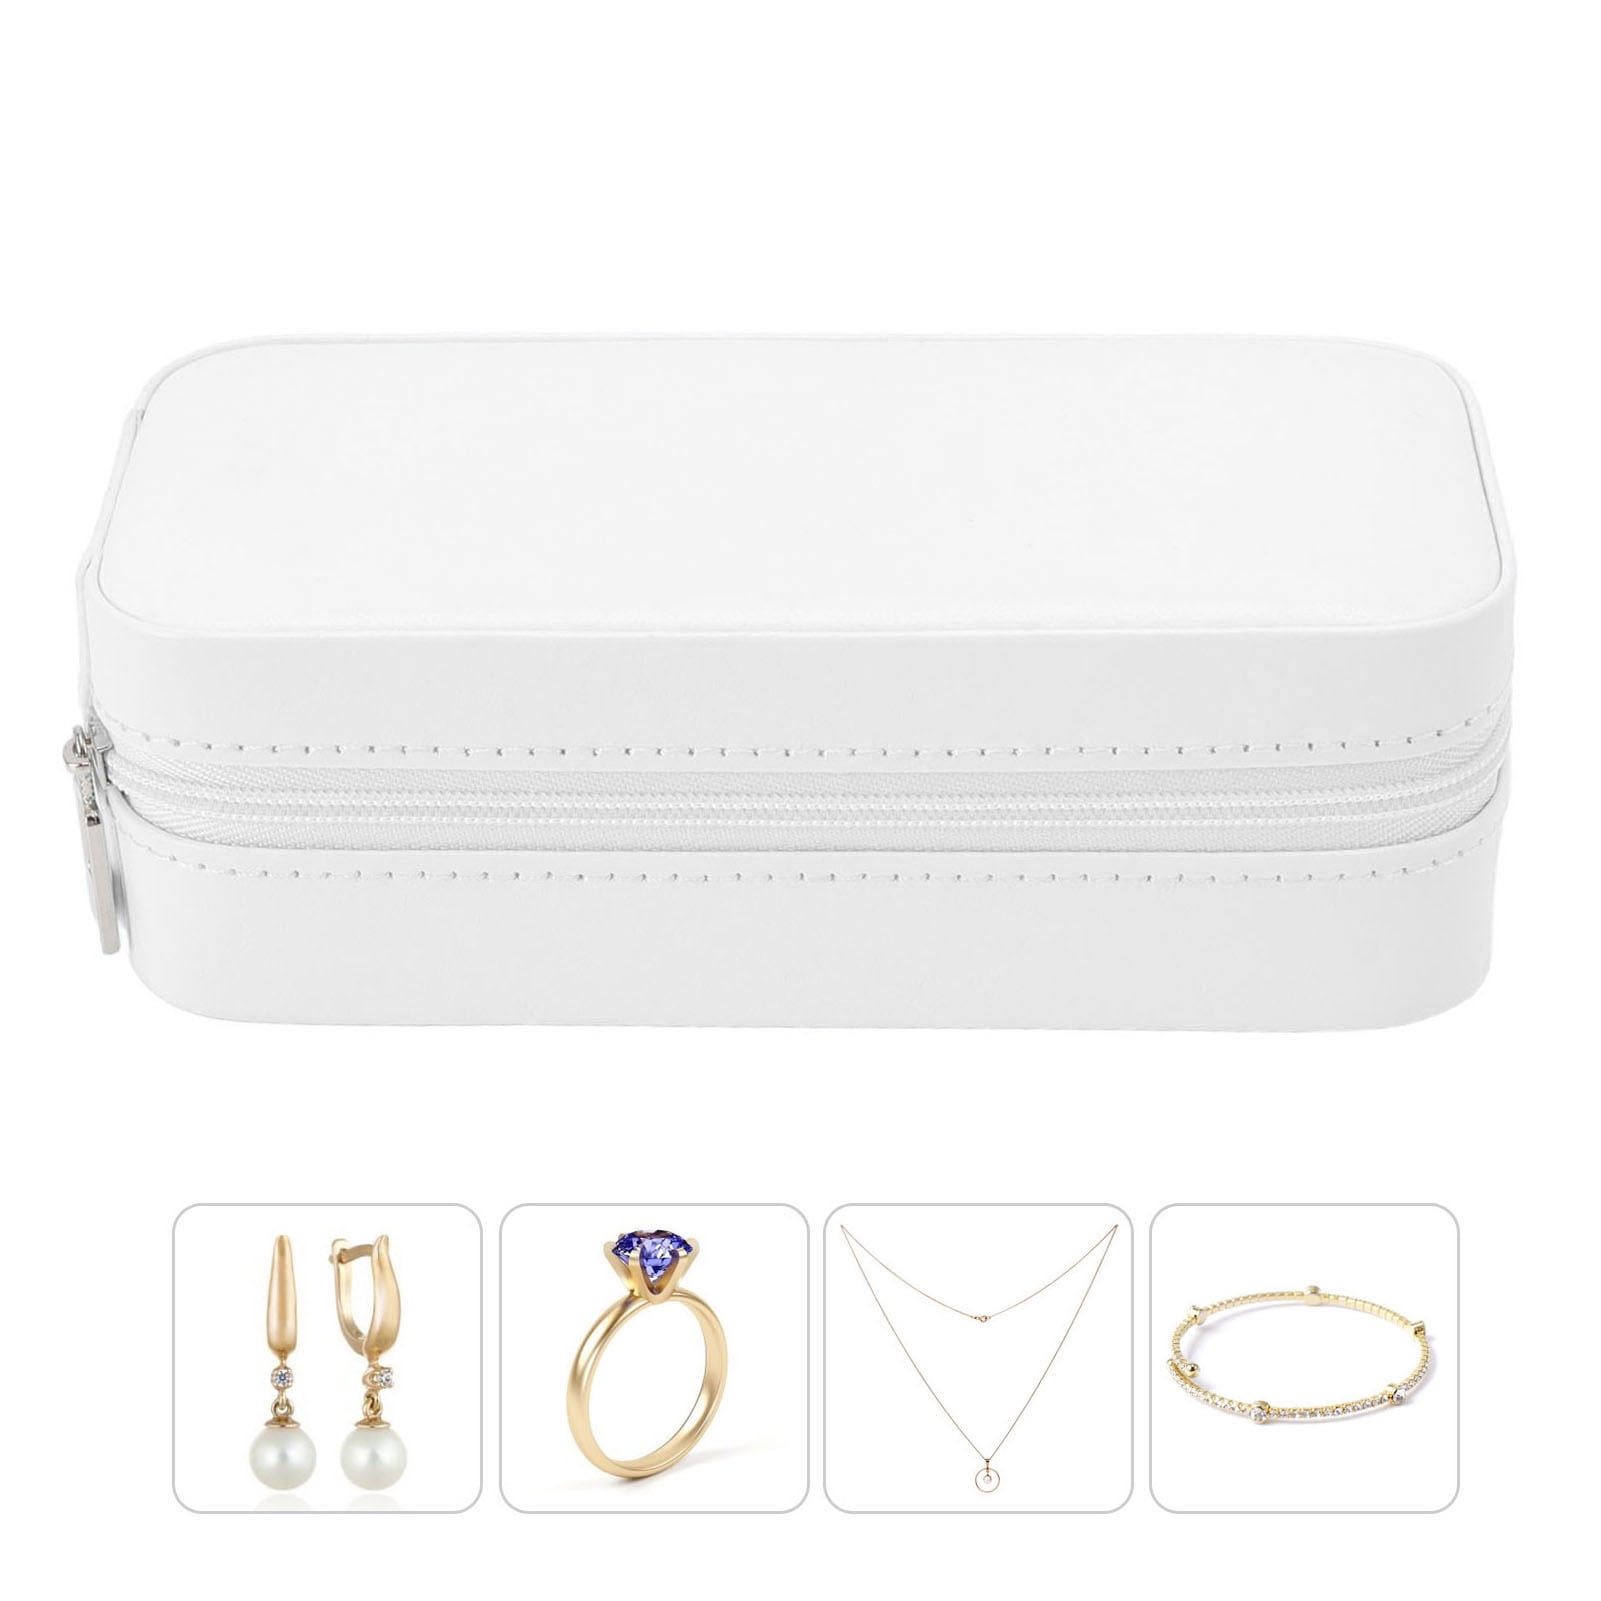 Nice Jewelry Case - Luxury All Luggage and Accessories - Travel, Women  M43449